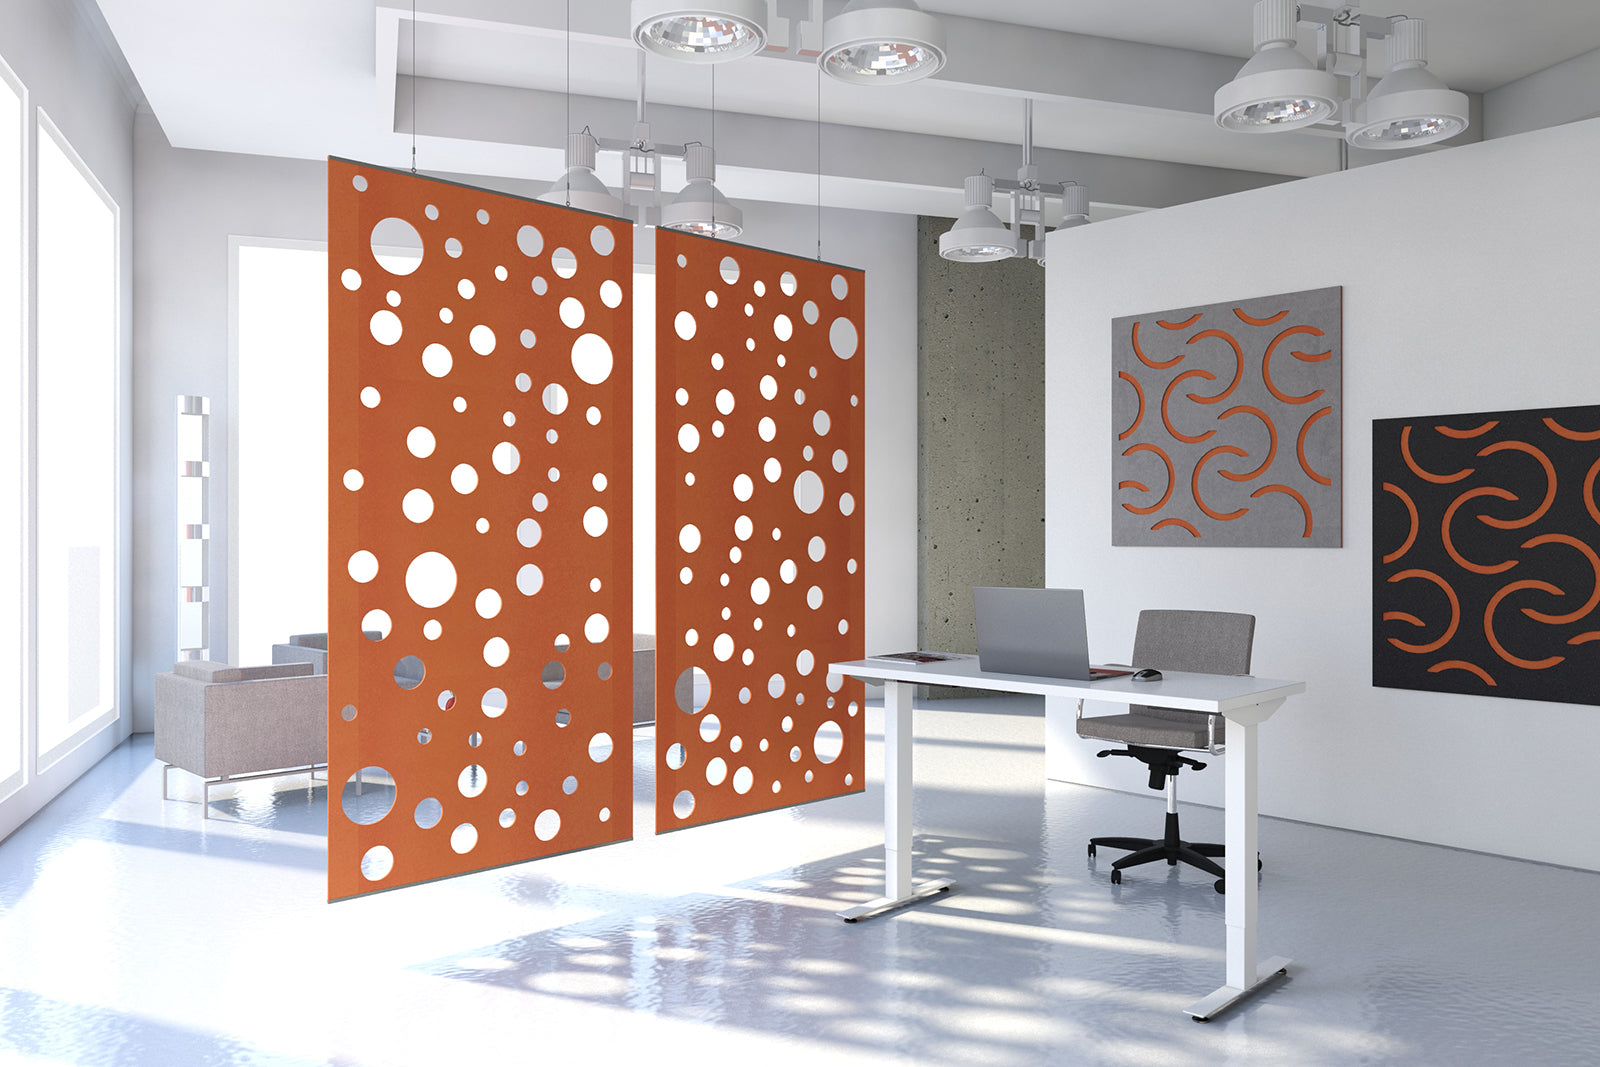 Echodeco 90% Acoustical Panel and Partitions  47"w x 70"h